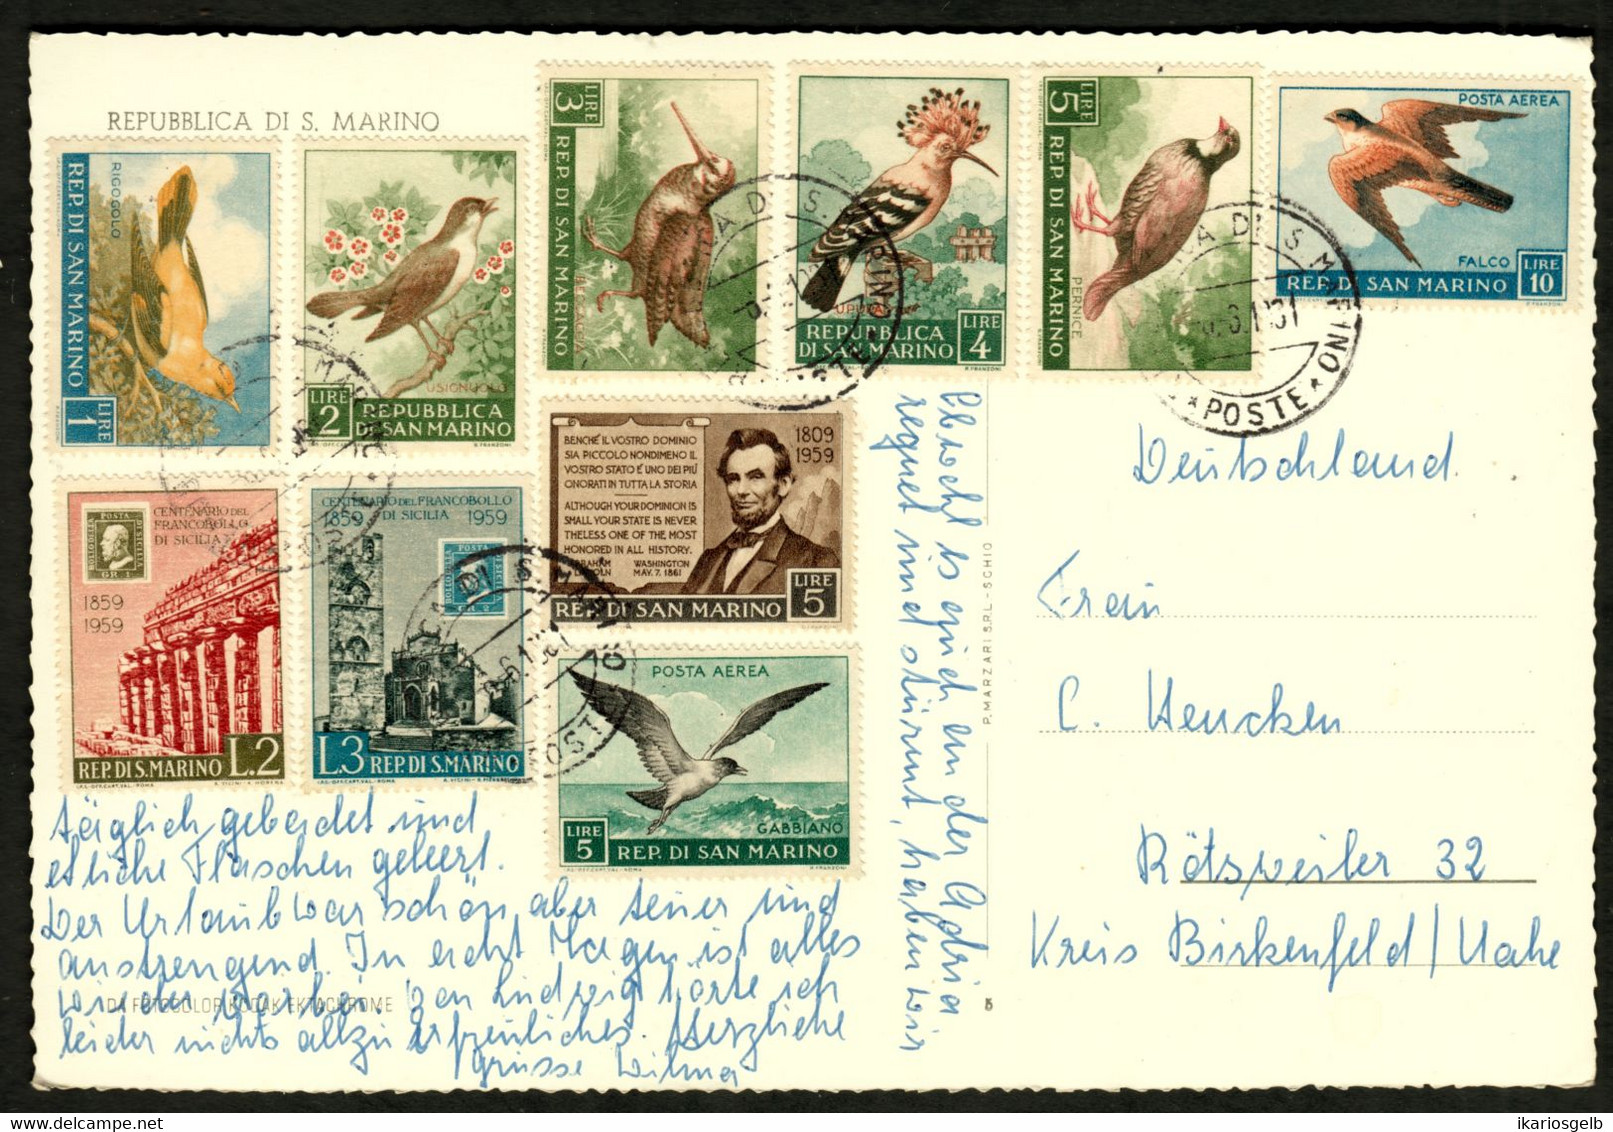 San Marino 1961 Postcard Deco Franked 10 Commemorative Stamps Real Used > Birkenfeld Retsweiler Germany A5 - Storia Postale